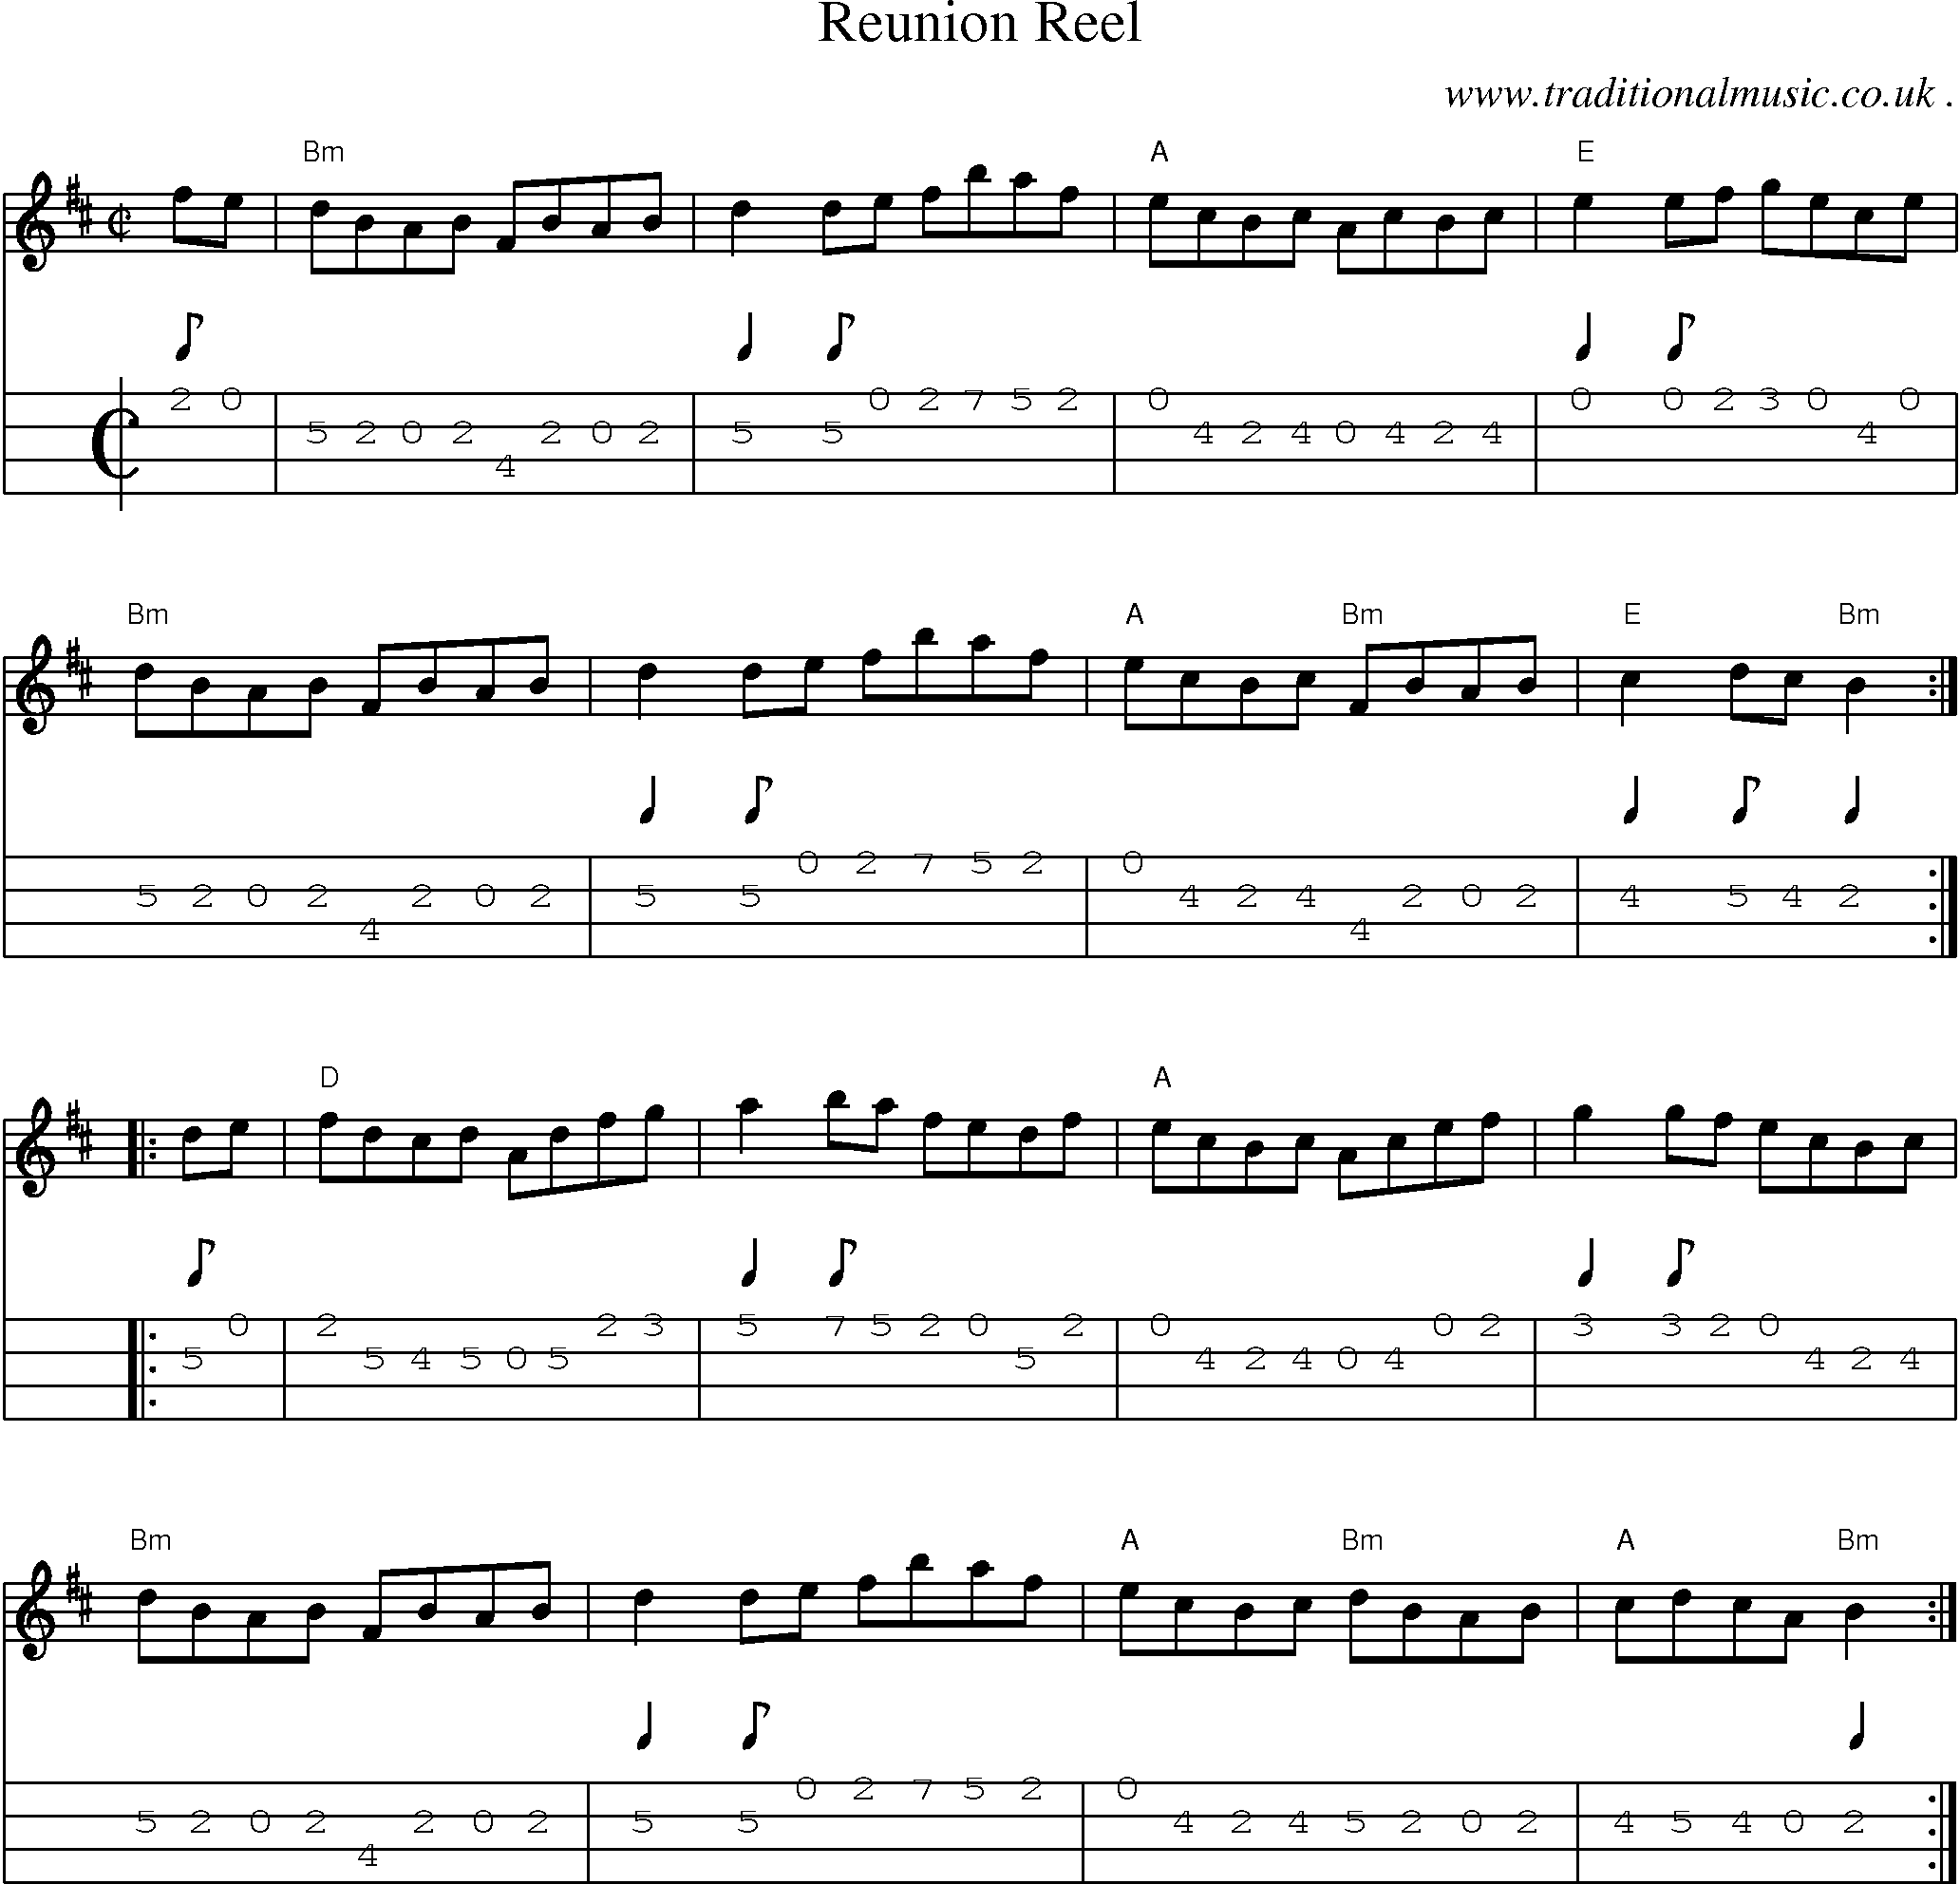 Music Score and Guitar Tabs for Reunion Reel